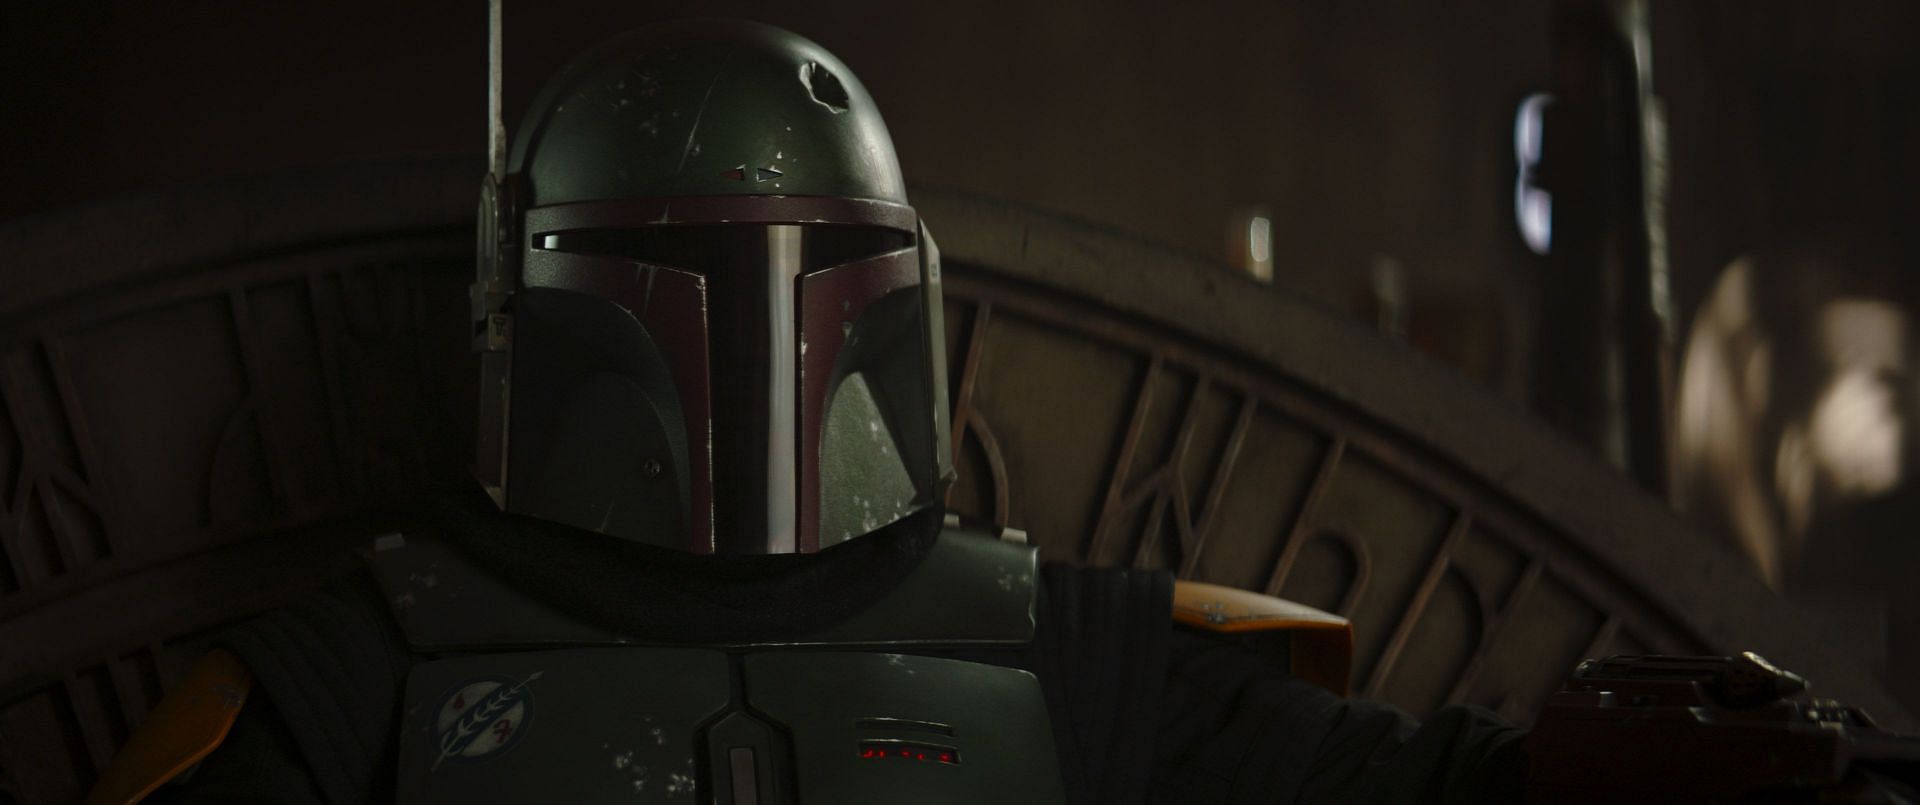 Boba Fett&#039;s striking Mandalorian armor has become an iconic image in pop culture (Image via Lucasfilm)